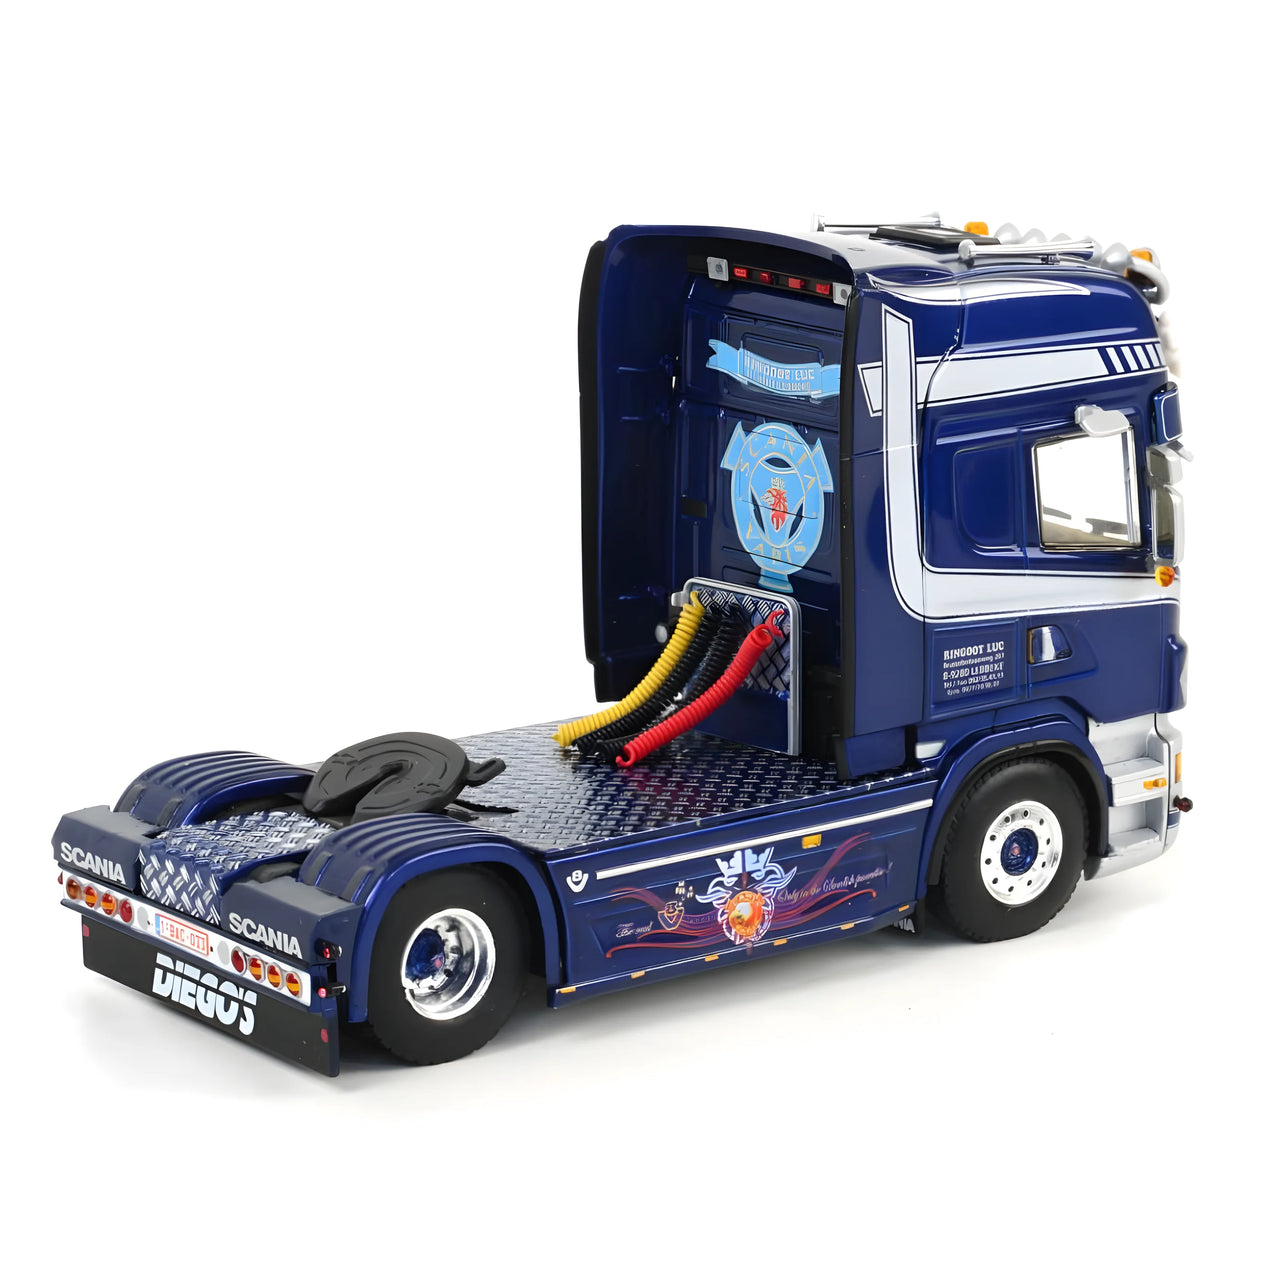 01-1180 Scania R6 Tractor 4x2 Scale 1:50 (Discontinued Model)